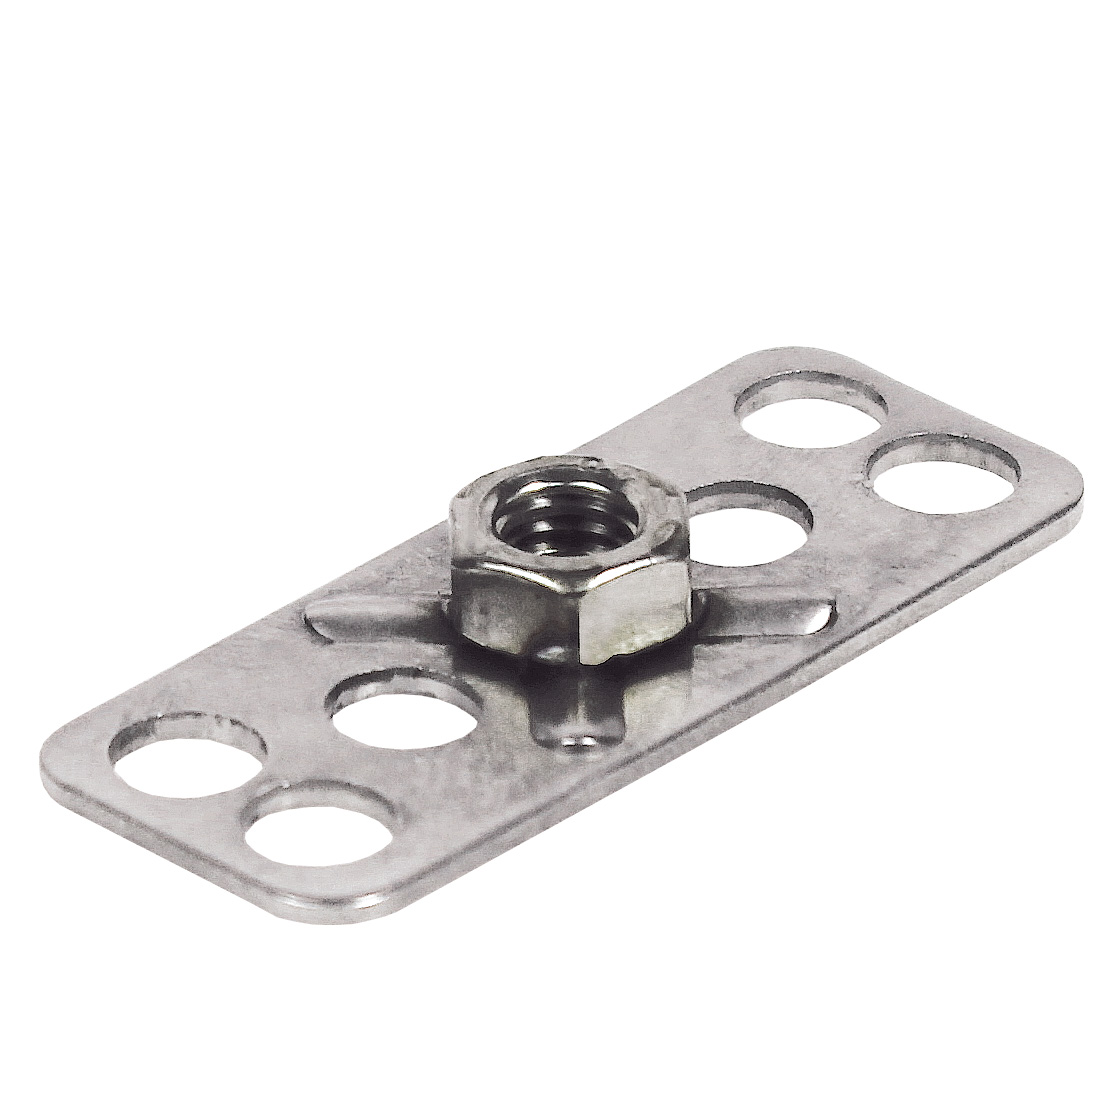 Masterplate® glueable insert - rectangular with nut - Stainless steel - 